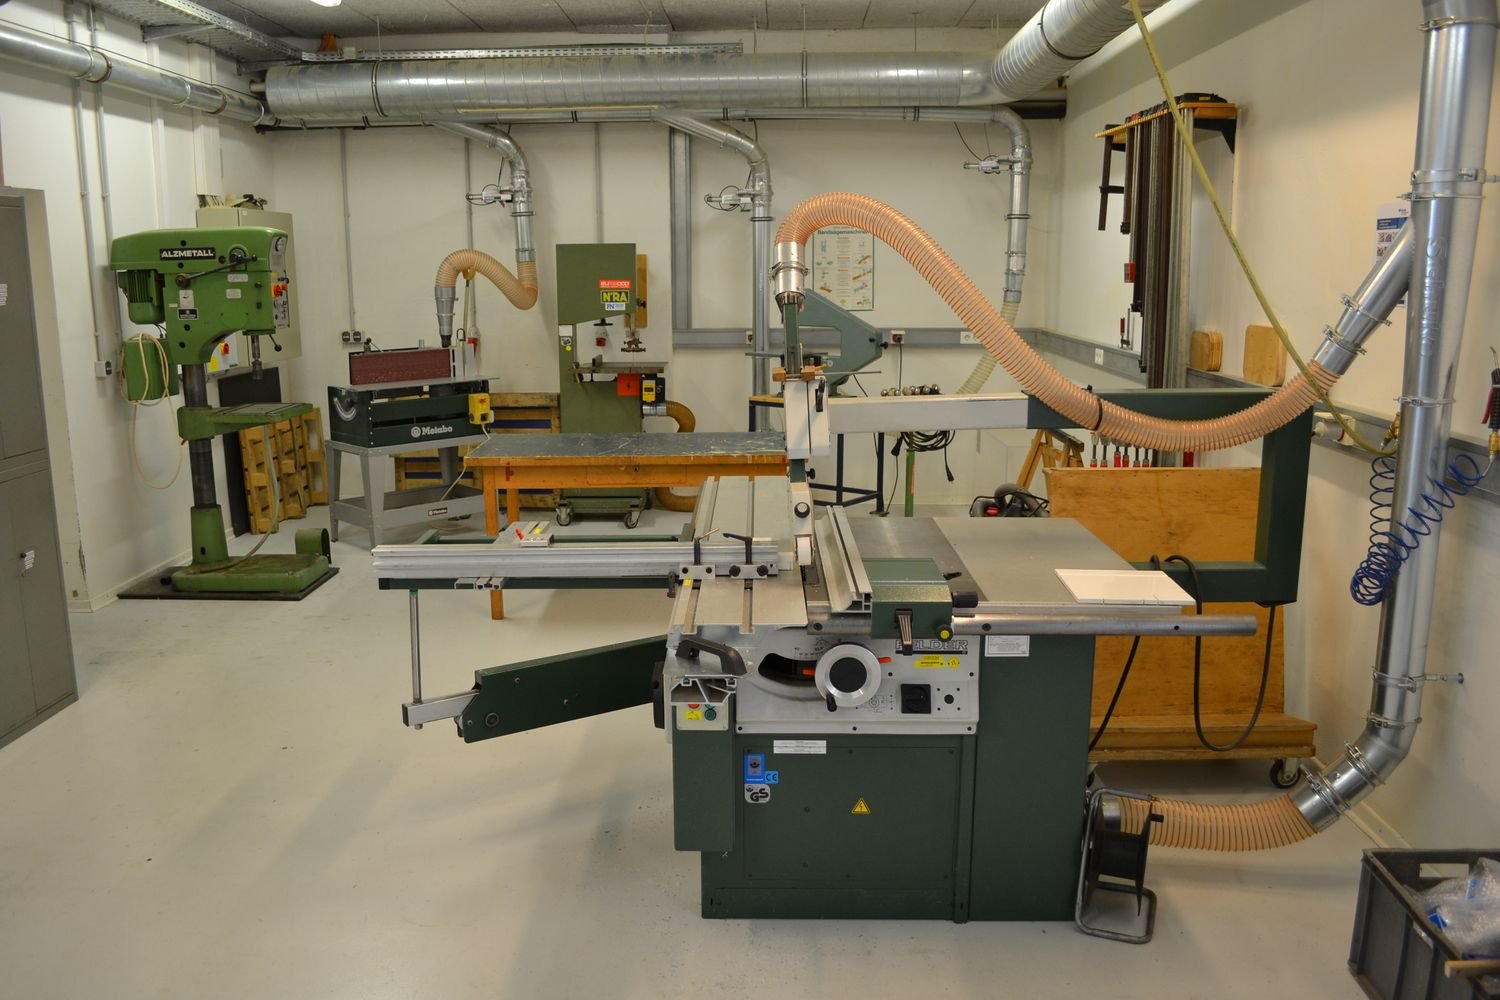 Saws, drills and milling machines for prototypes